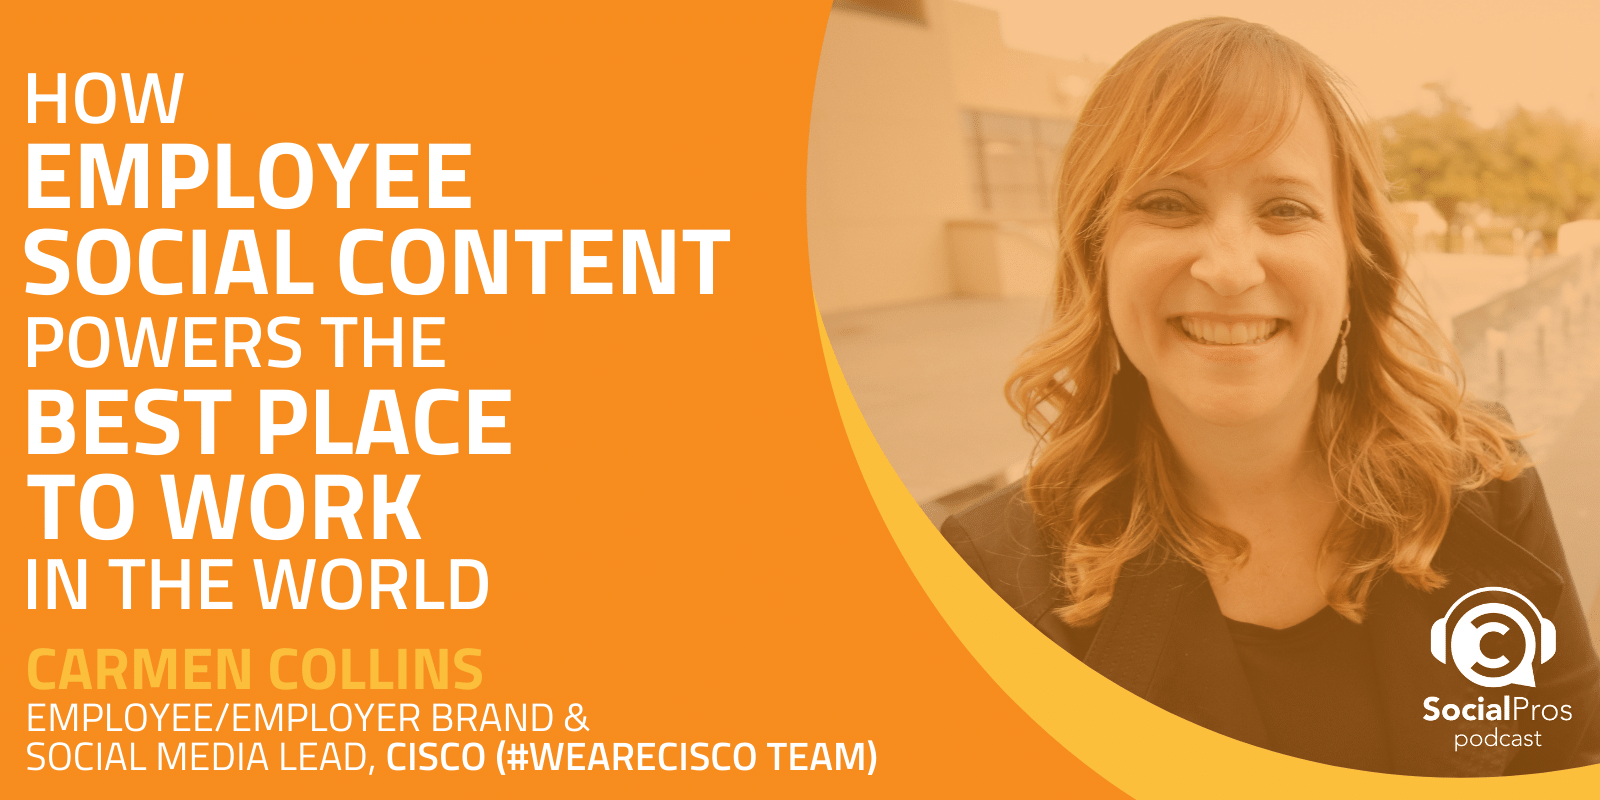 How Employee Social Content Powers The Best Place To Work In The World